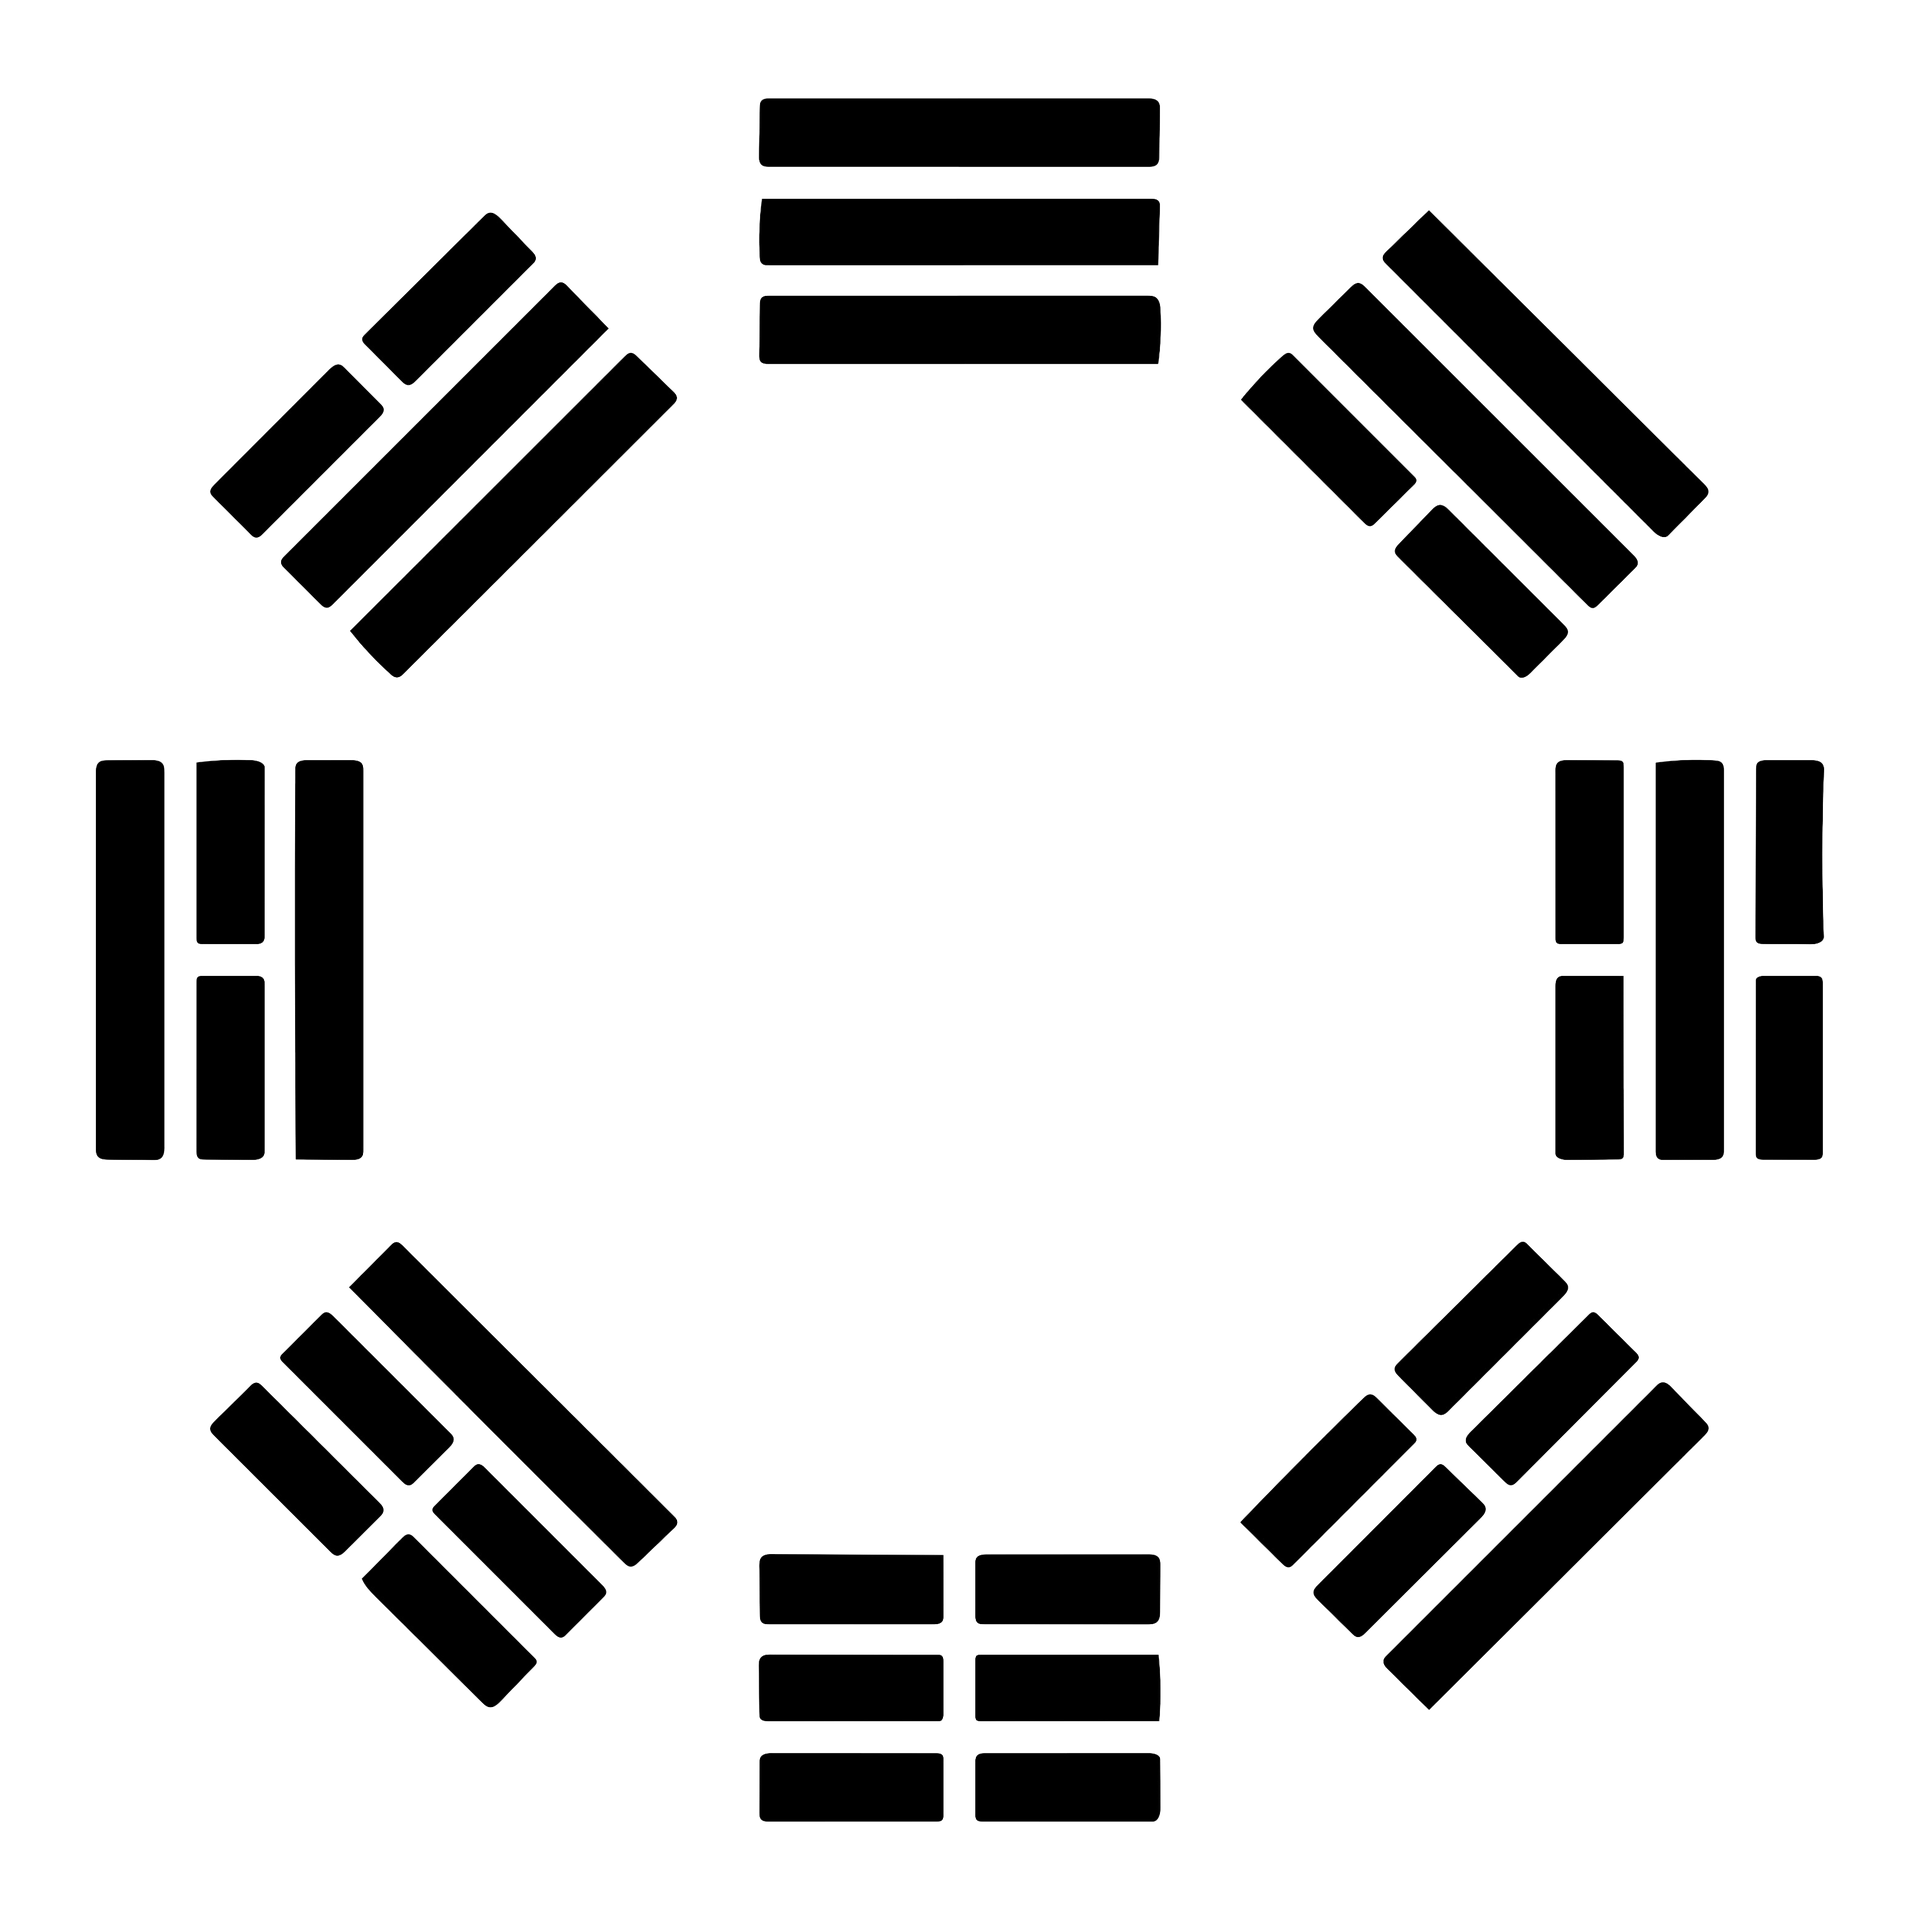 A circle composed of eights figures built from three stacked horizontal lines, where each line is either Yang (an unbroken, or solid line), or Yin (broken, an open line with a gap in the center).